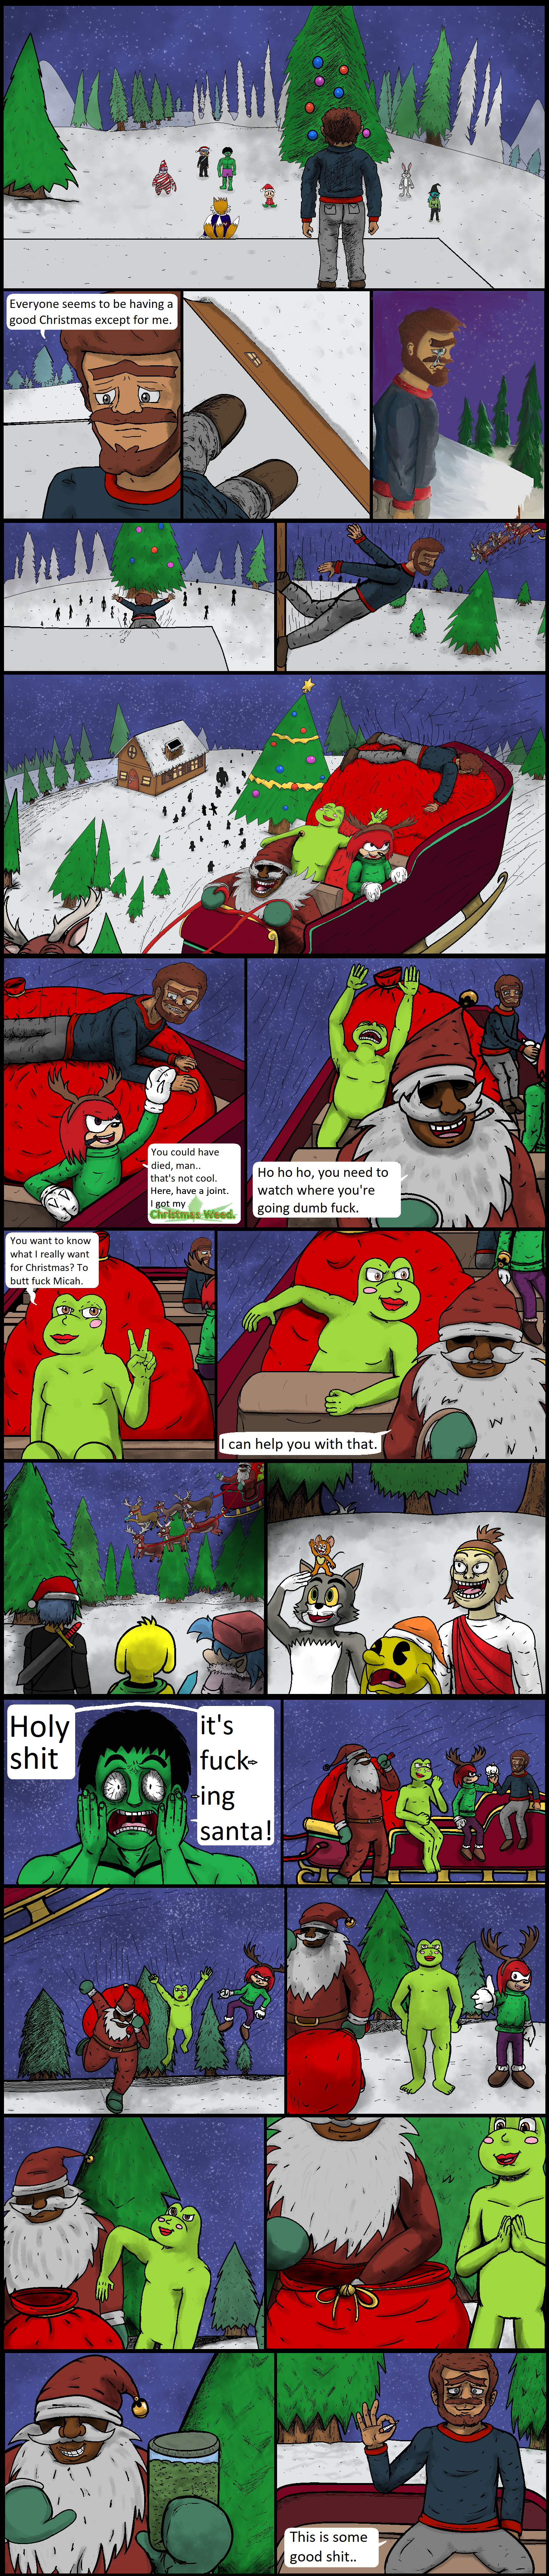 xmas/pg4.png. If you're seeing this, enable images. Or, perhaps we have a website issue. Try refreshing, if unsuccessful email c@commodorian.org with a detailed description of how you got here.